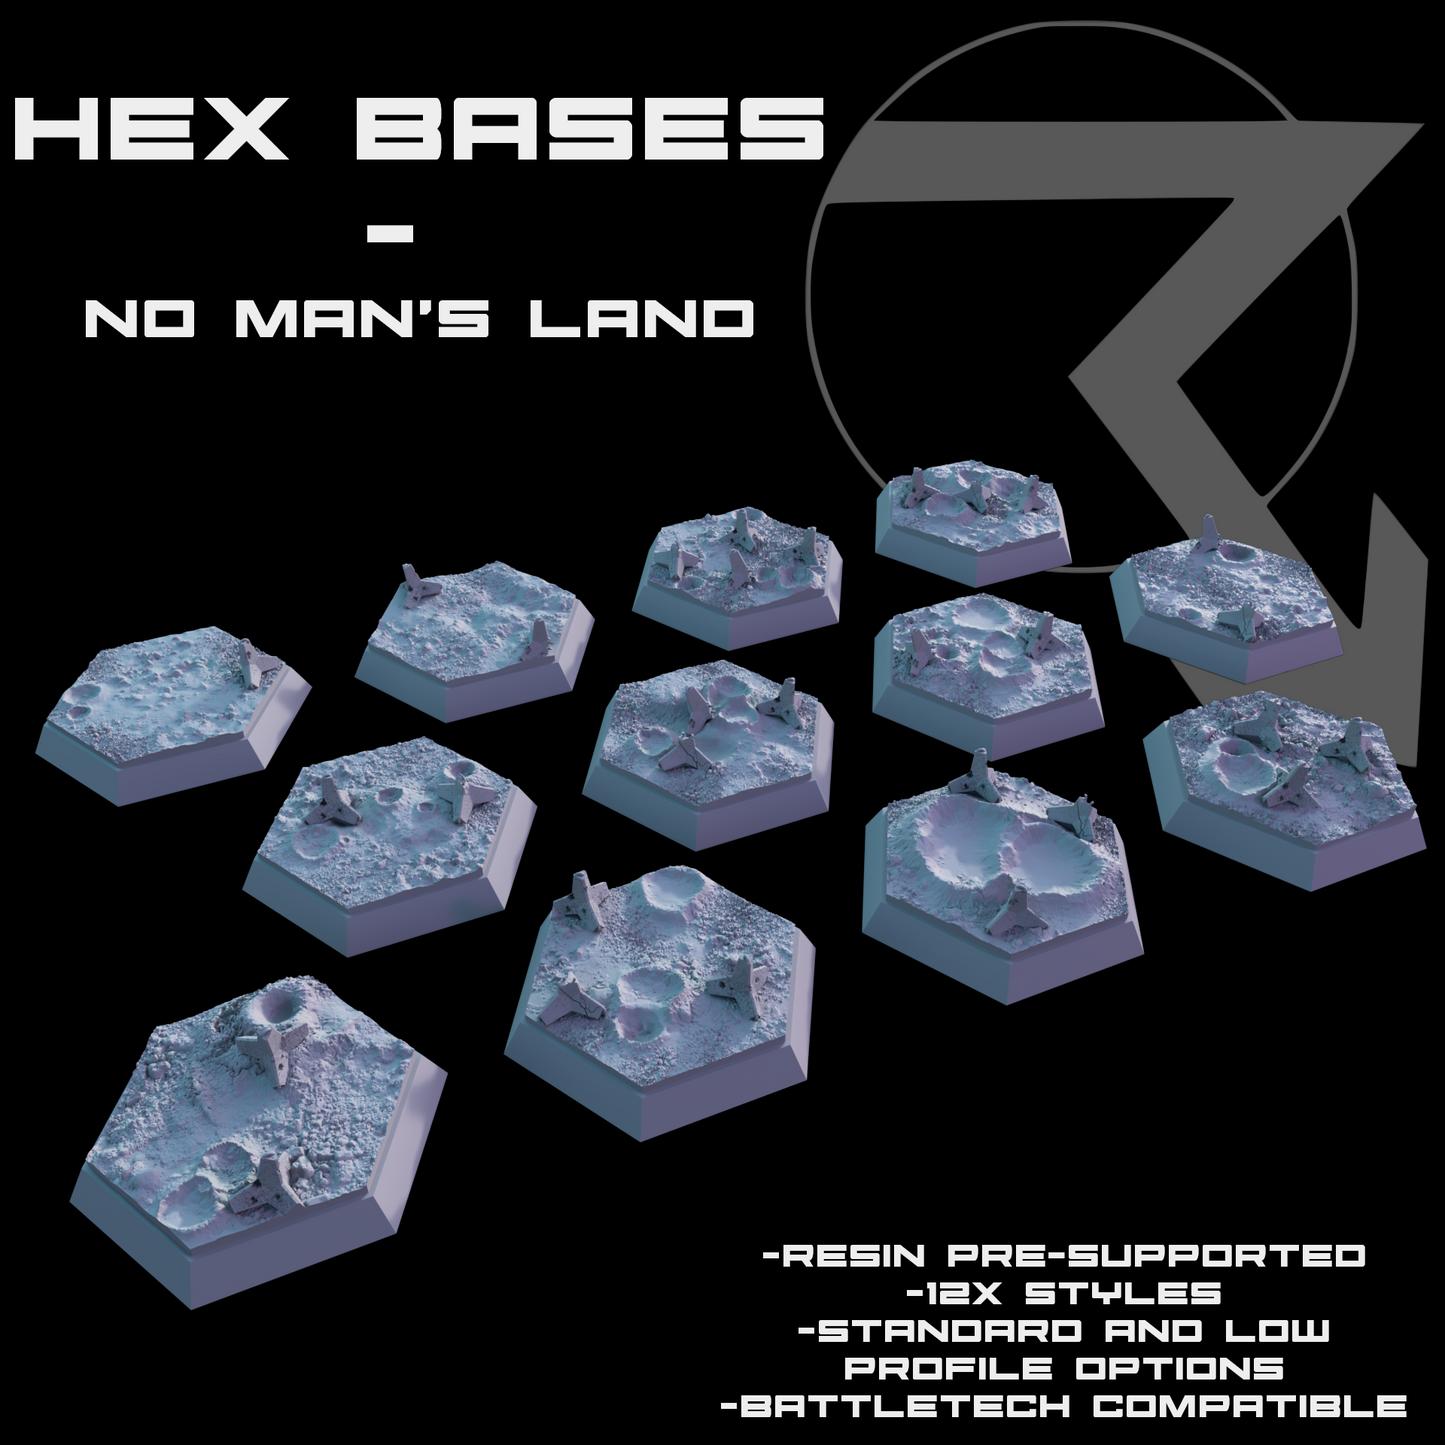 Miniature Bases - Hexed - No Man's Land